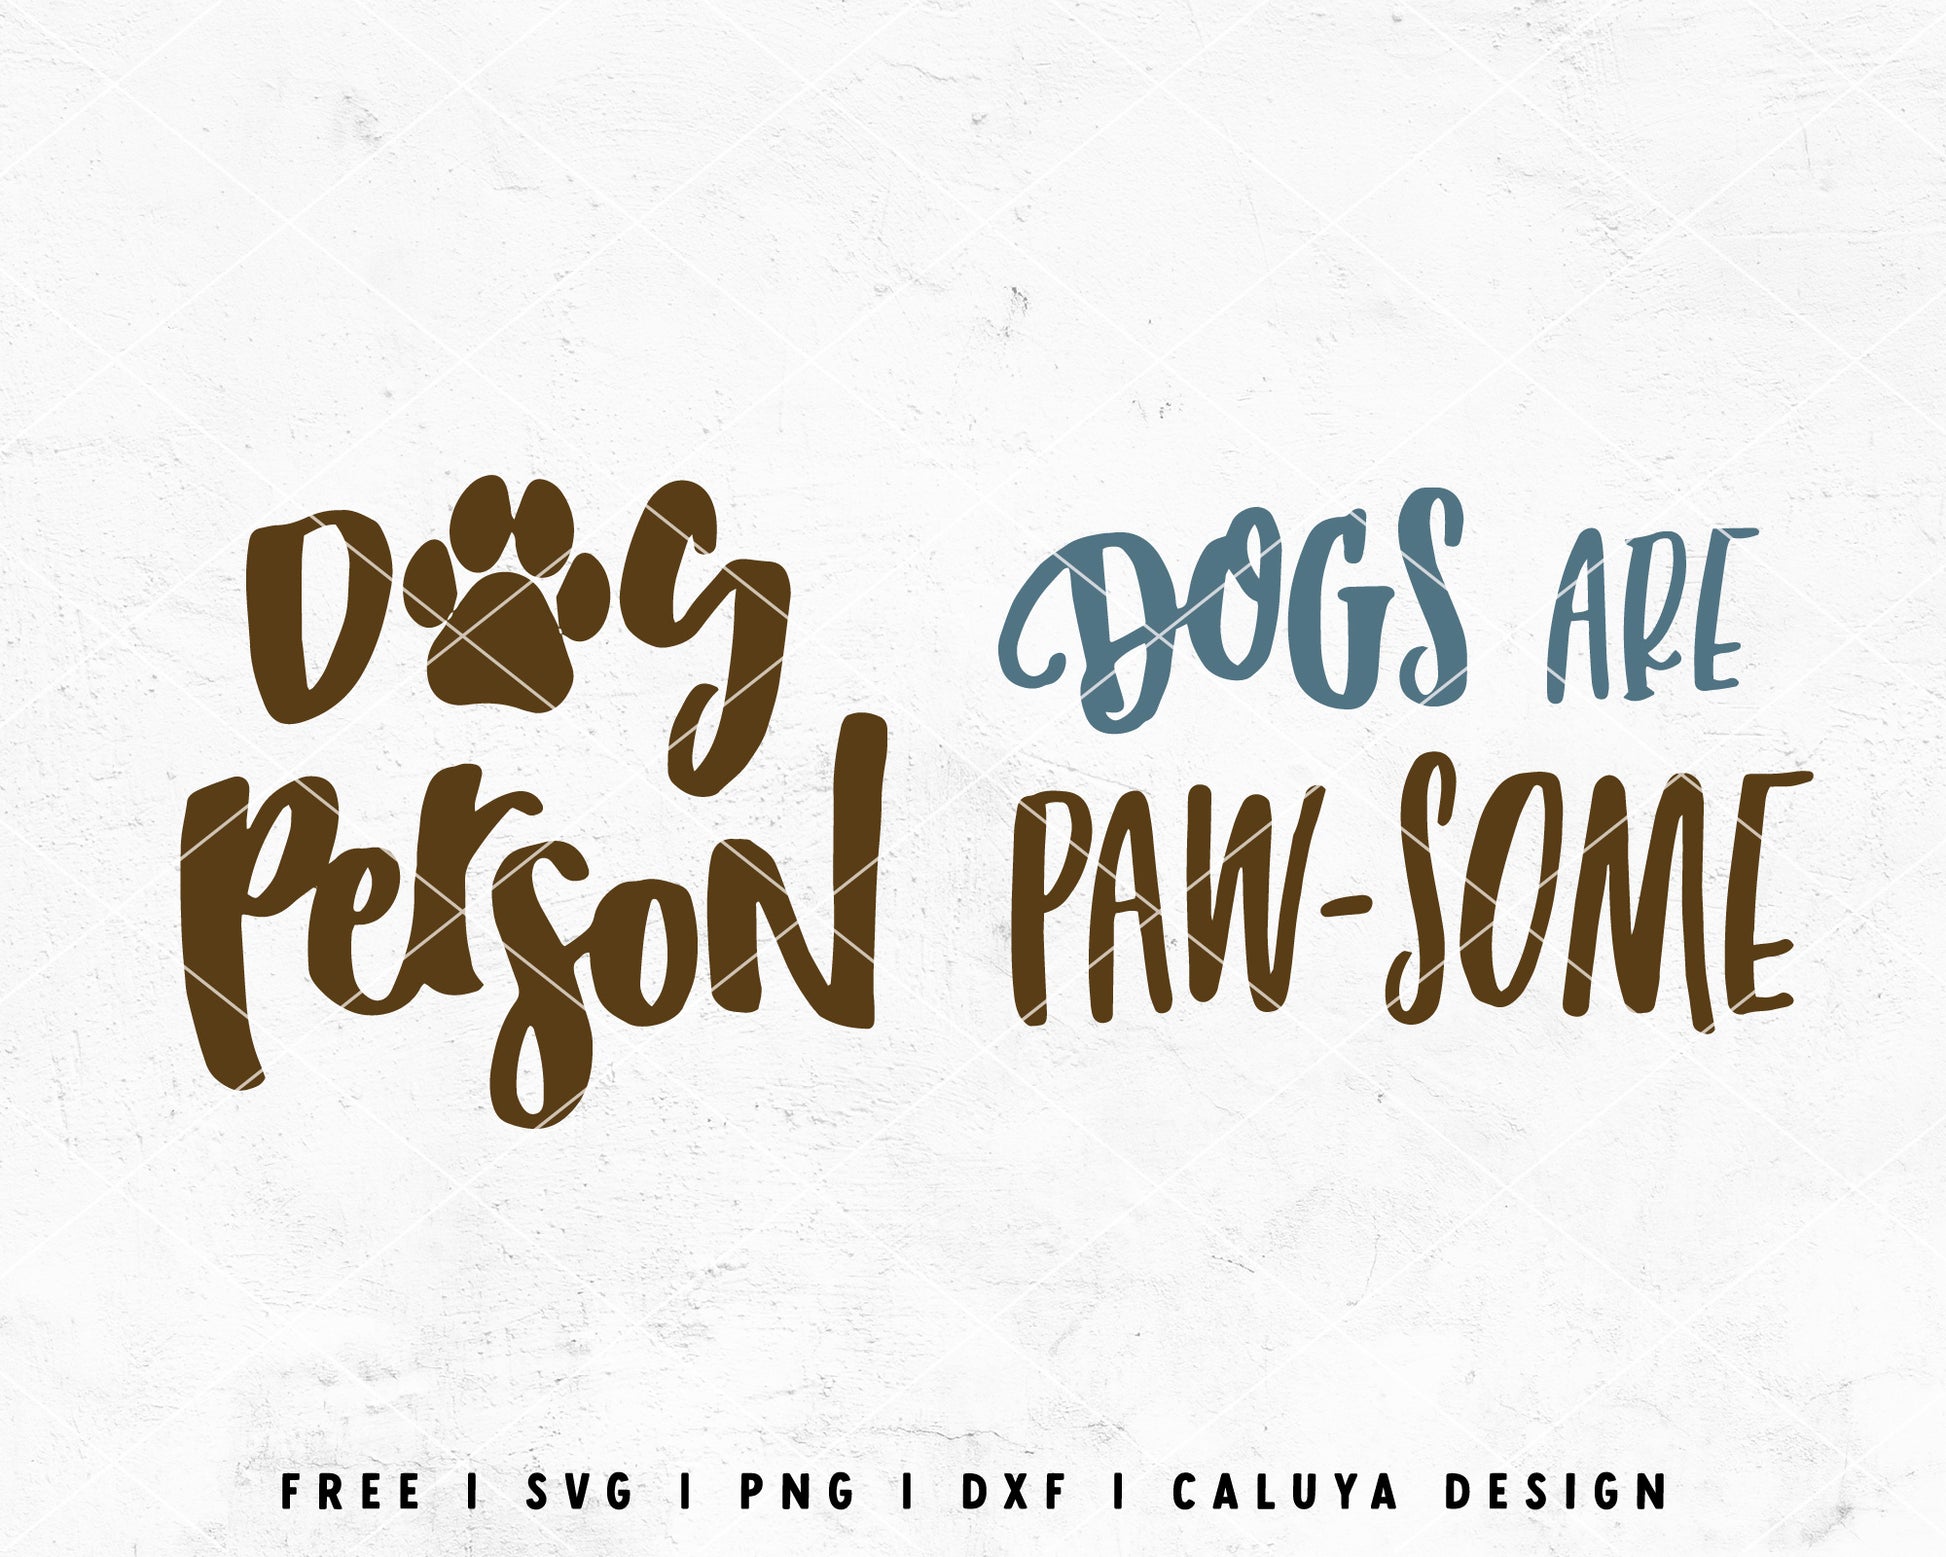 FREE Dog SVG | Dog Quote SVG  Cut File for Cricut, Cameo Silhouette | Free SVG Cut File